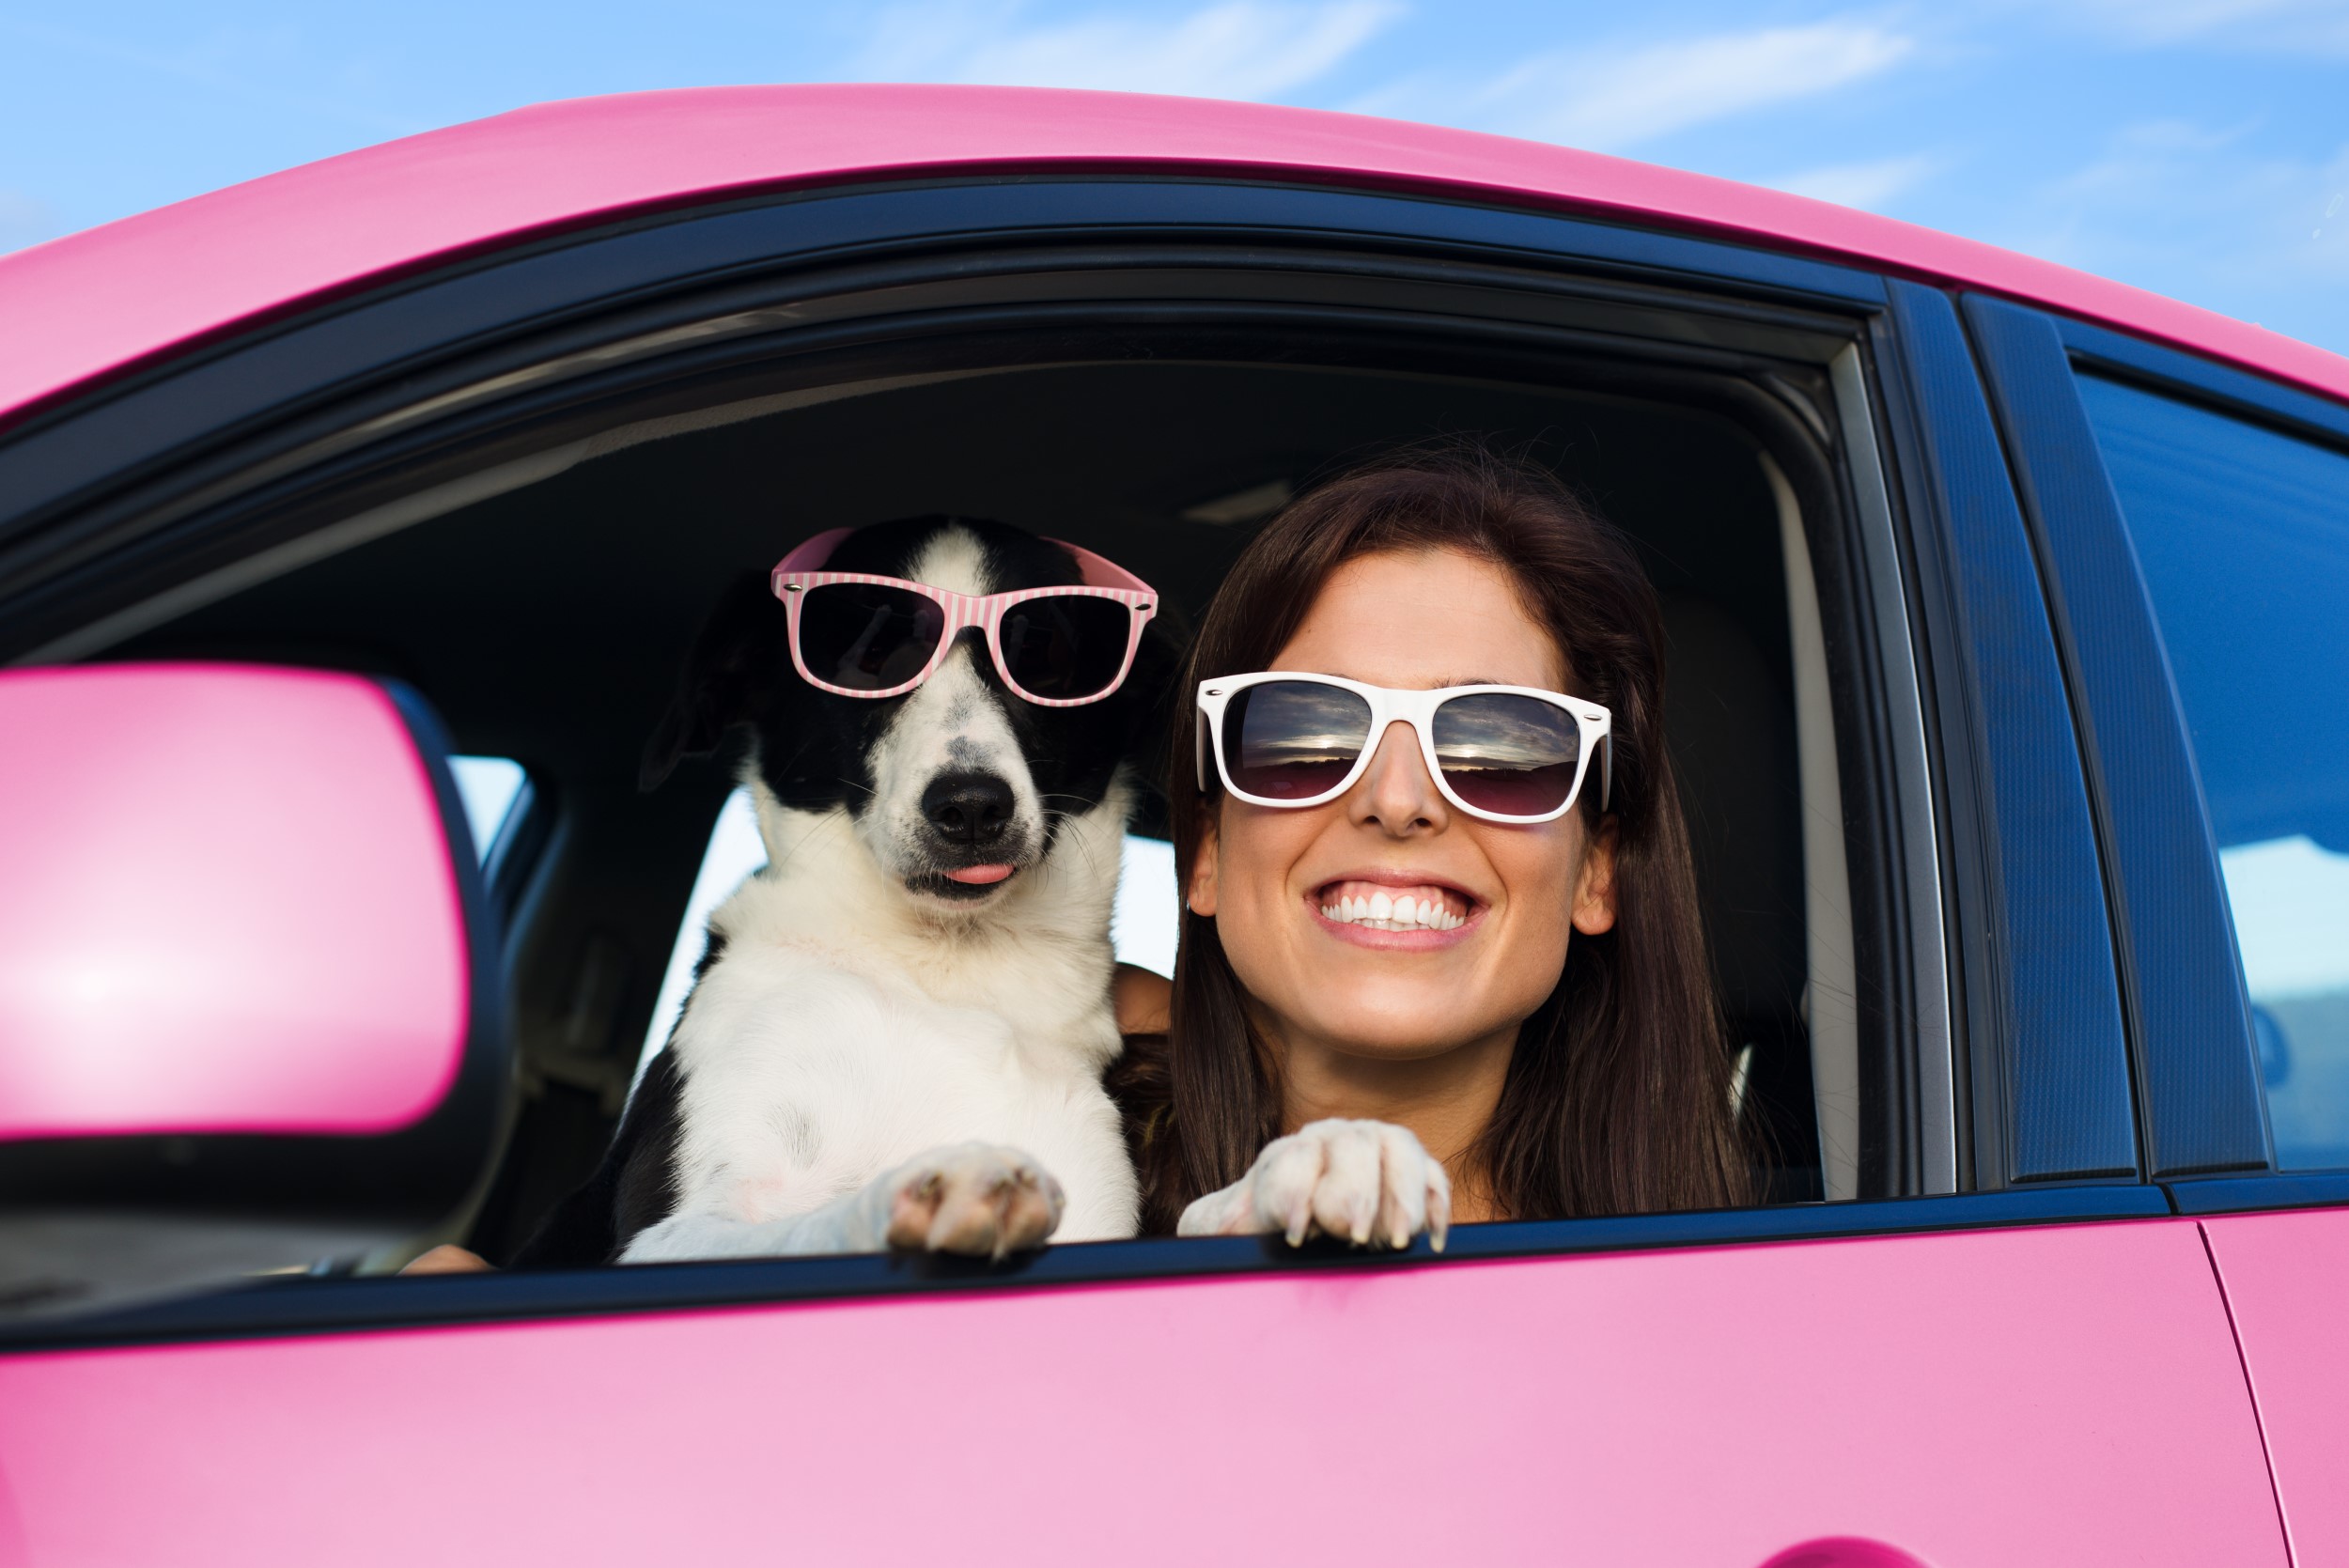 Summer road trip with your pooch